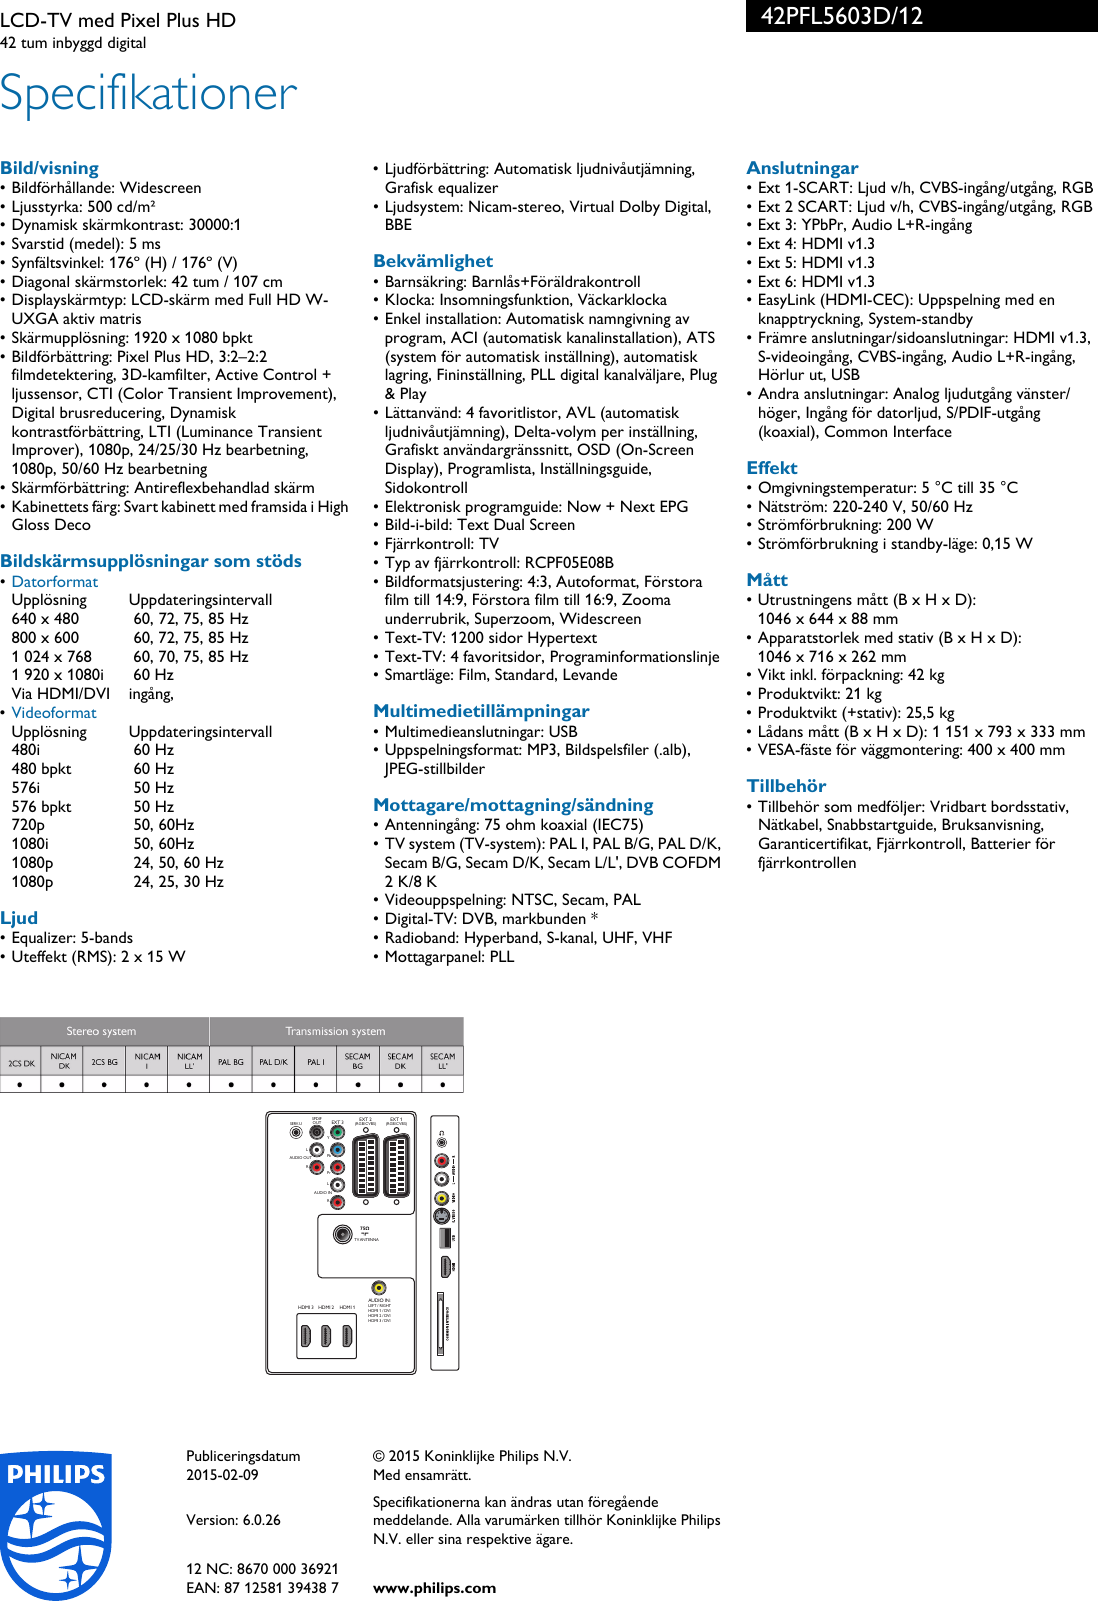 Page 3 of 3 - Philips 42PFL5603D/12 LCD-TV Med Pixel Plus HD User Manual Broschyr 42pfl5603d 12 Pss Swese